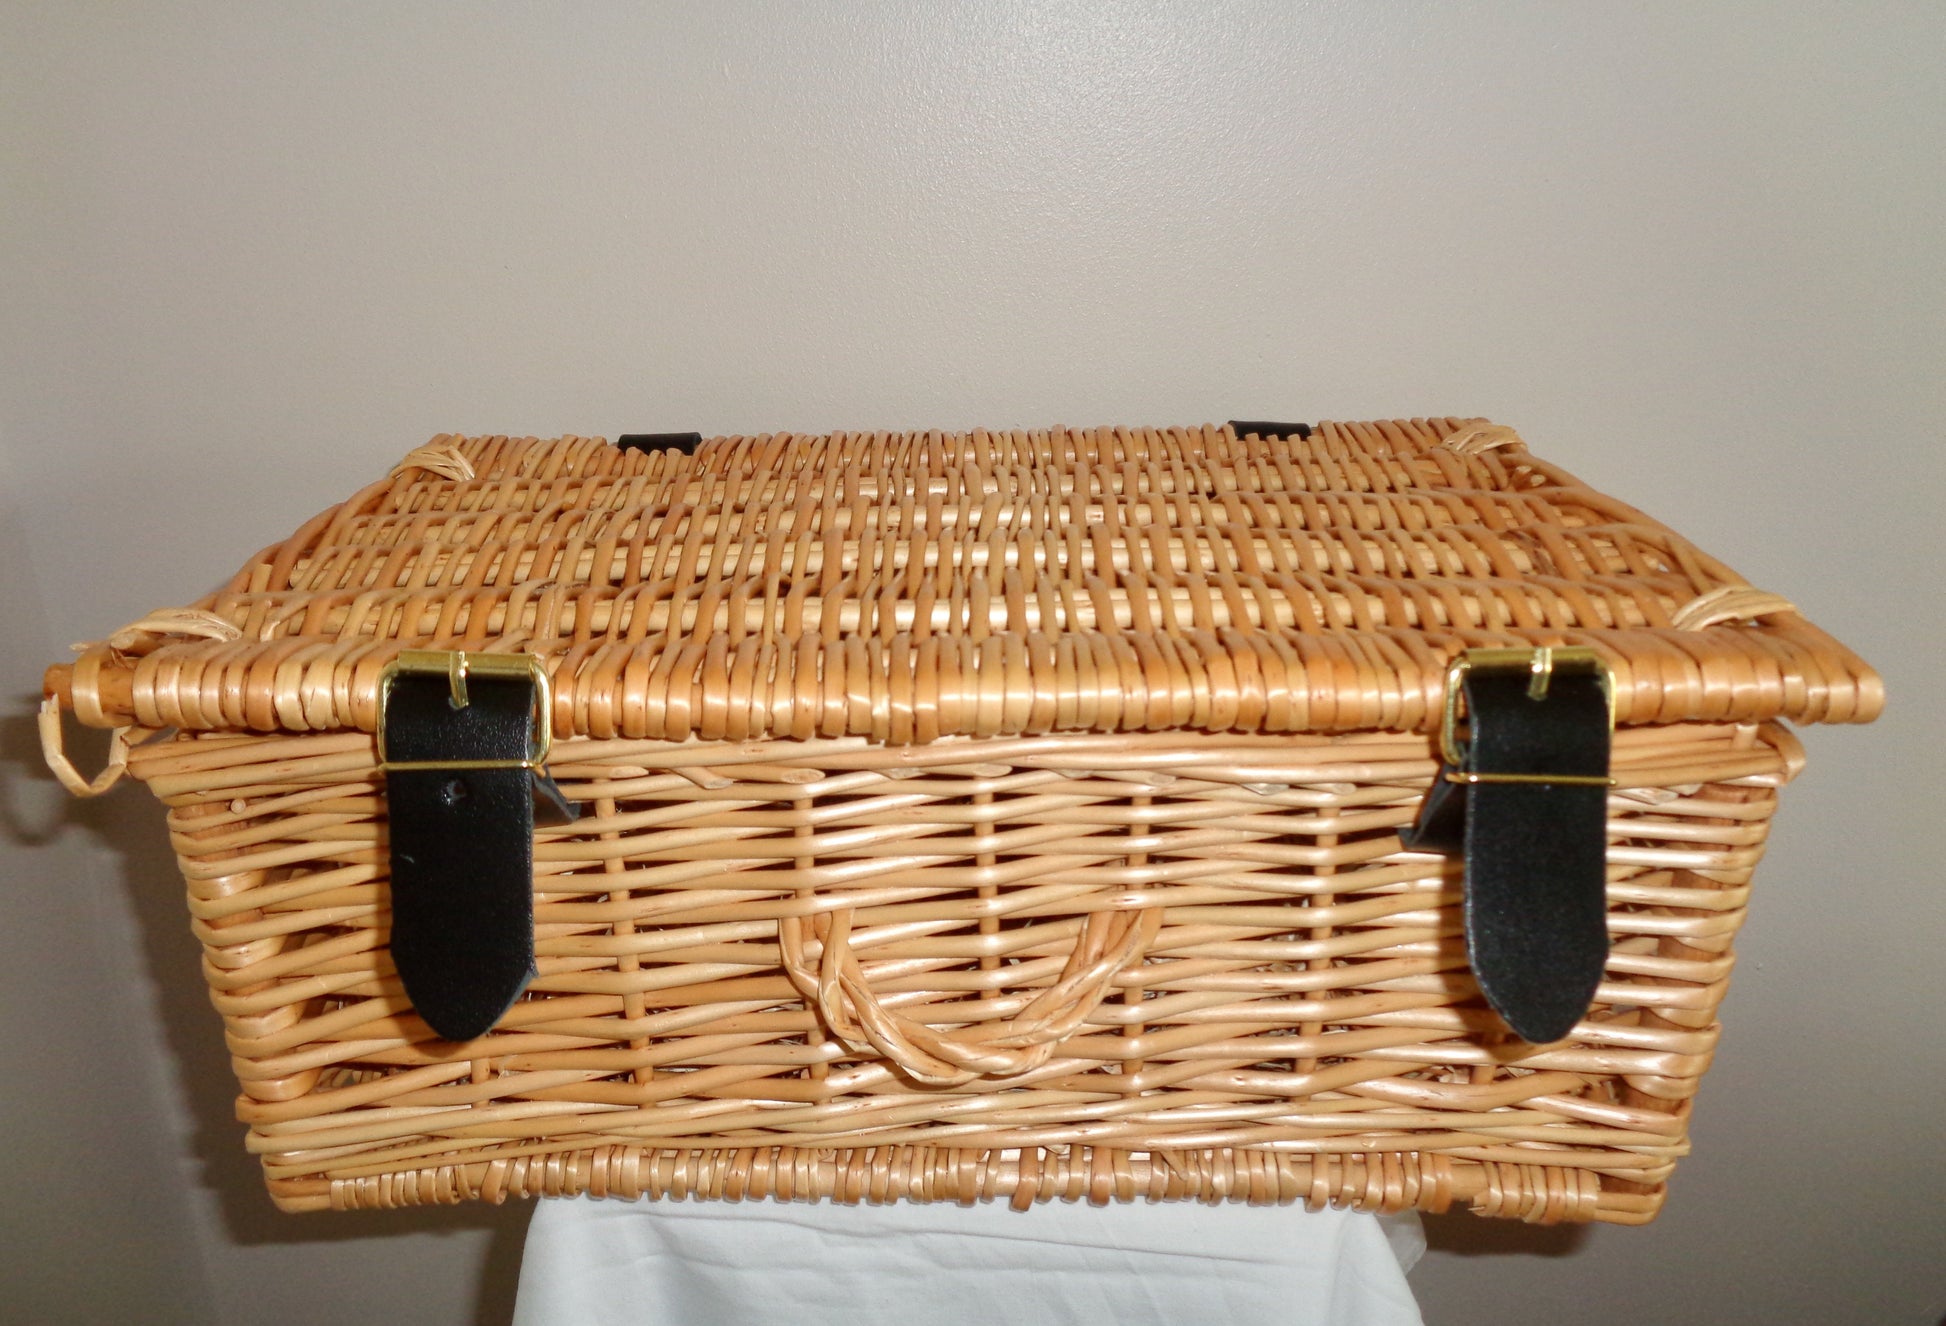 Small Wicker Picnic Basket With Brown Leather Closure Straps And Wicker Handle